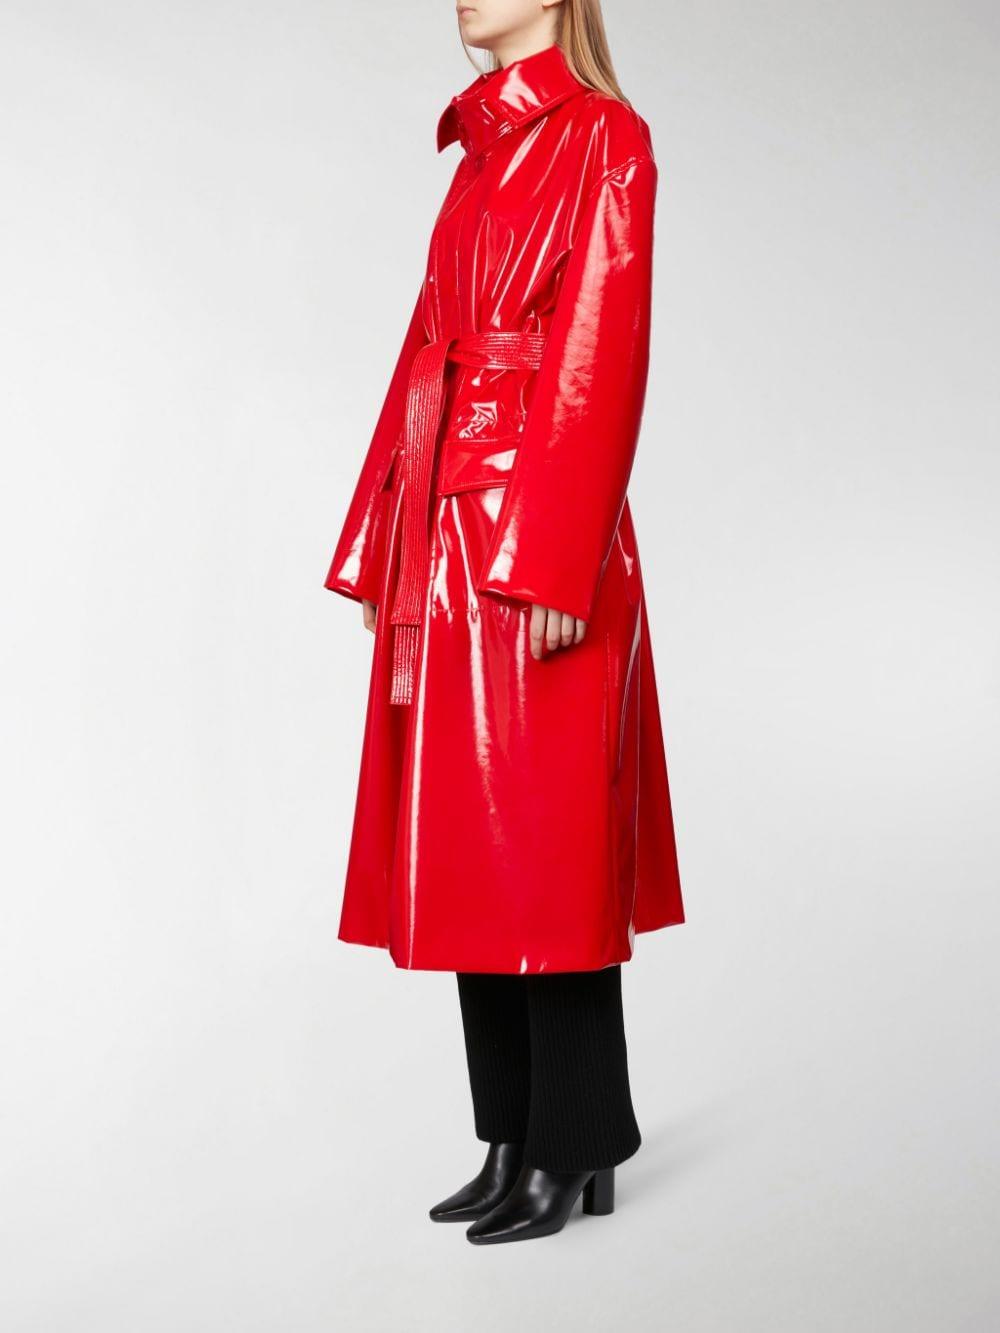 Balenciaga Patent Leather Trench Coat in Red - Lyst